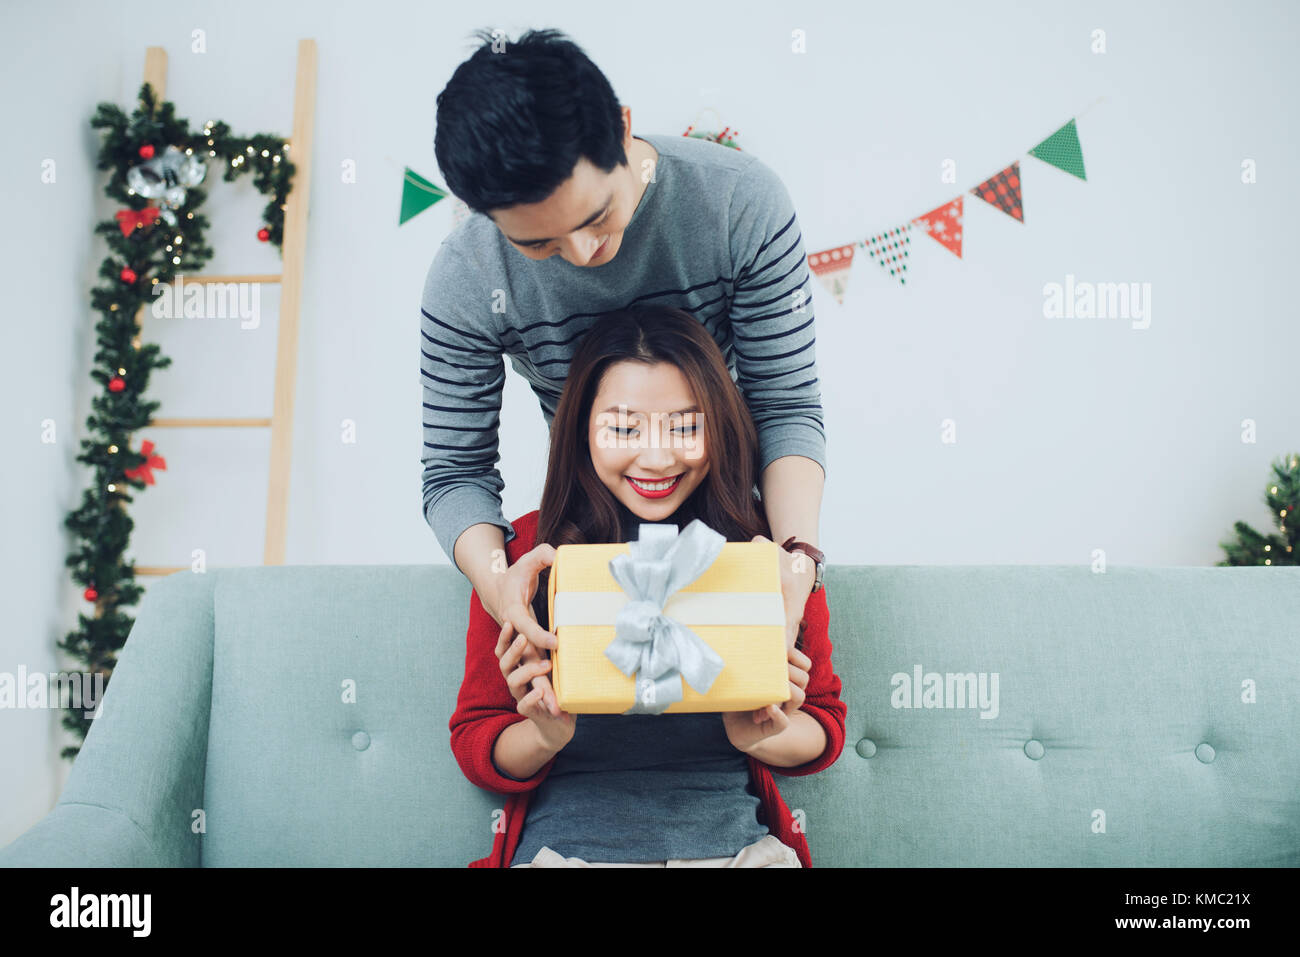 Christmas Asian Couple. A handsome man giving her girlfriend/wife a gift at home celebrating New Year People Stock Photo